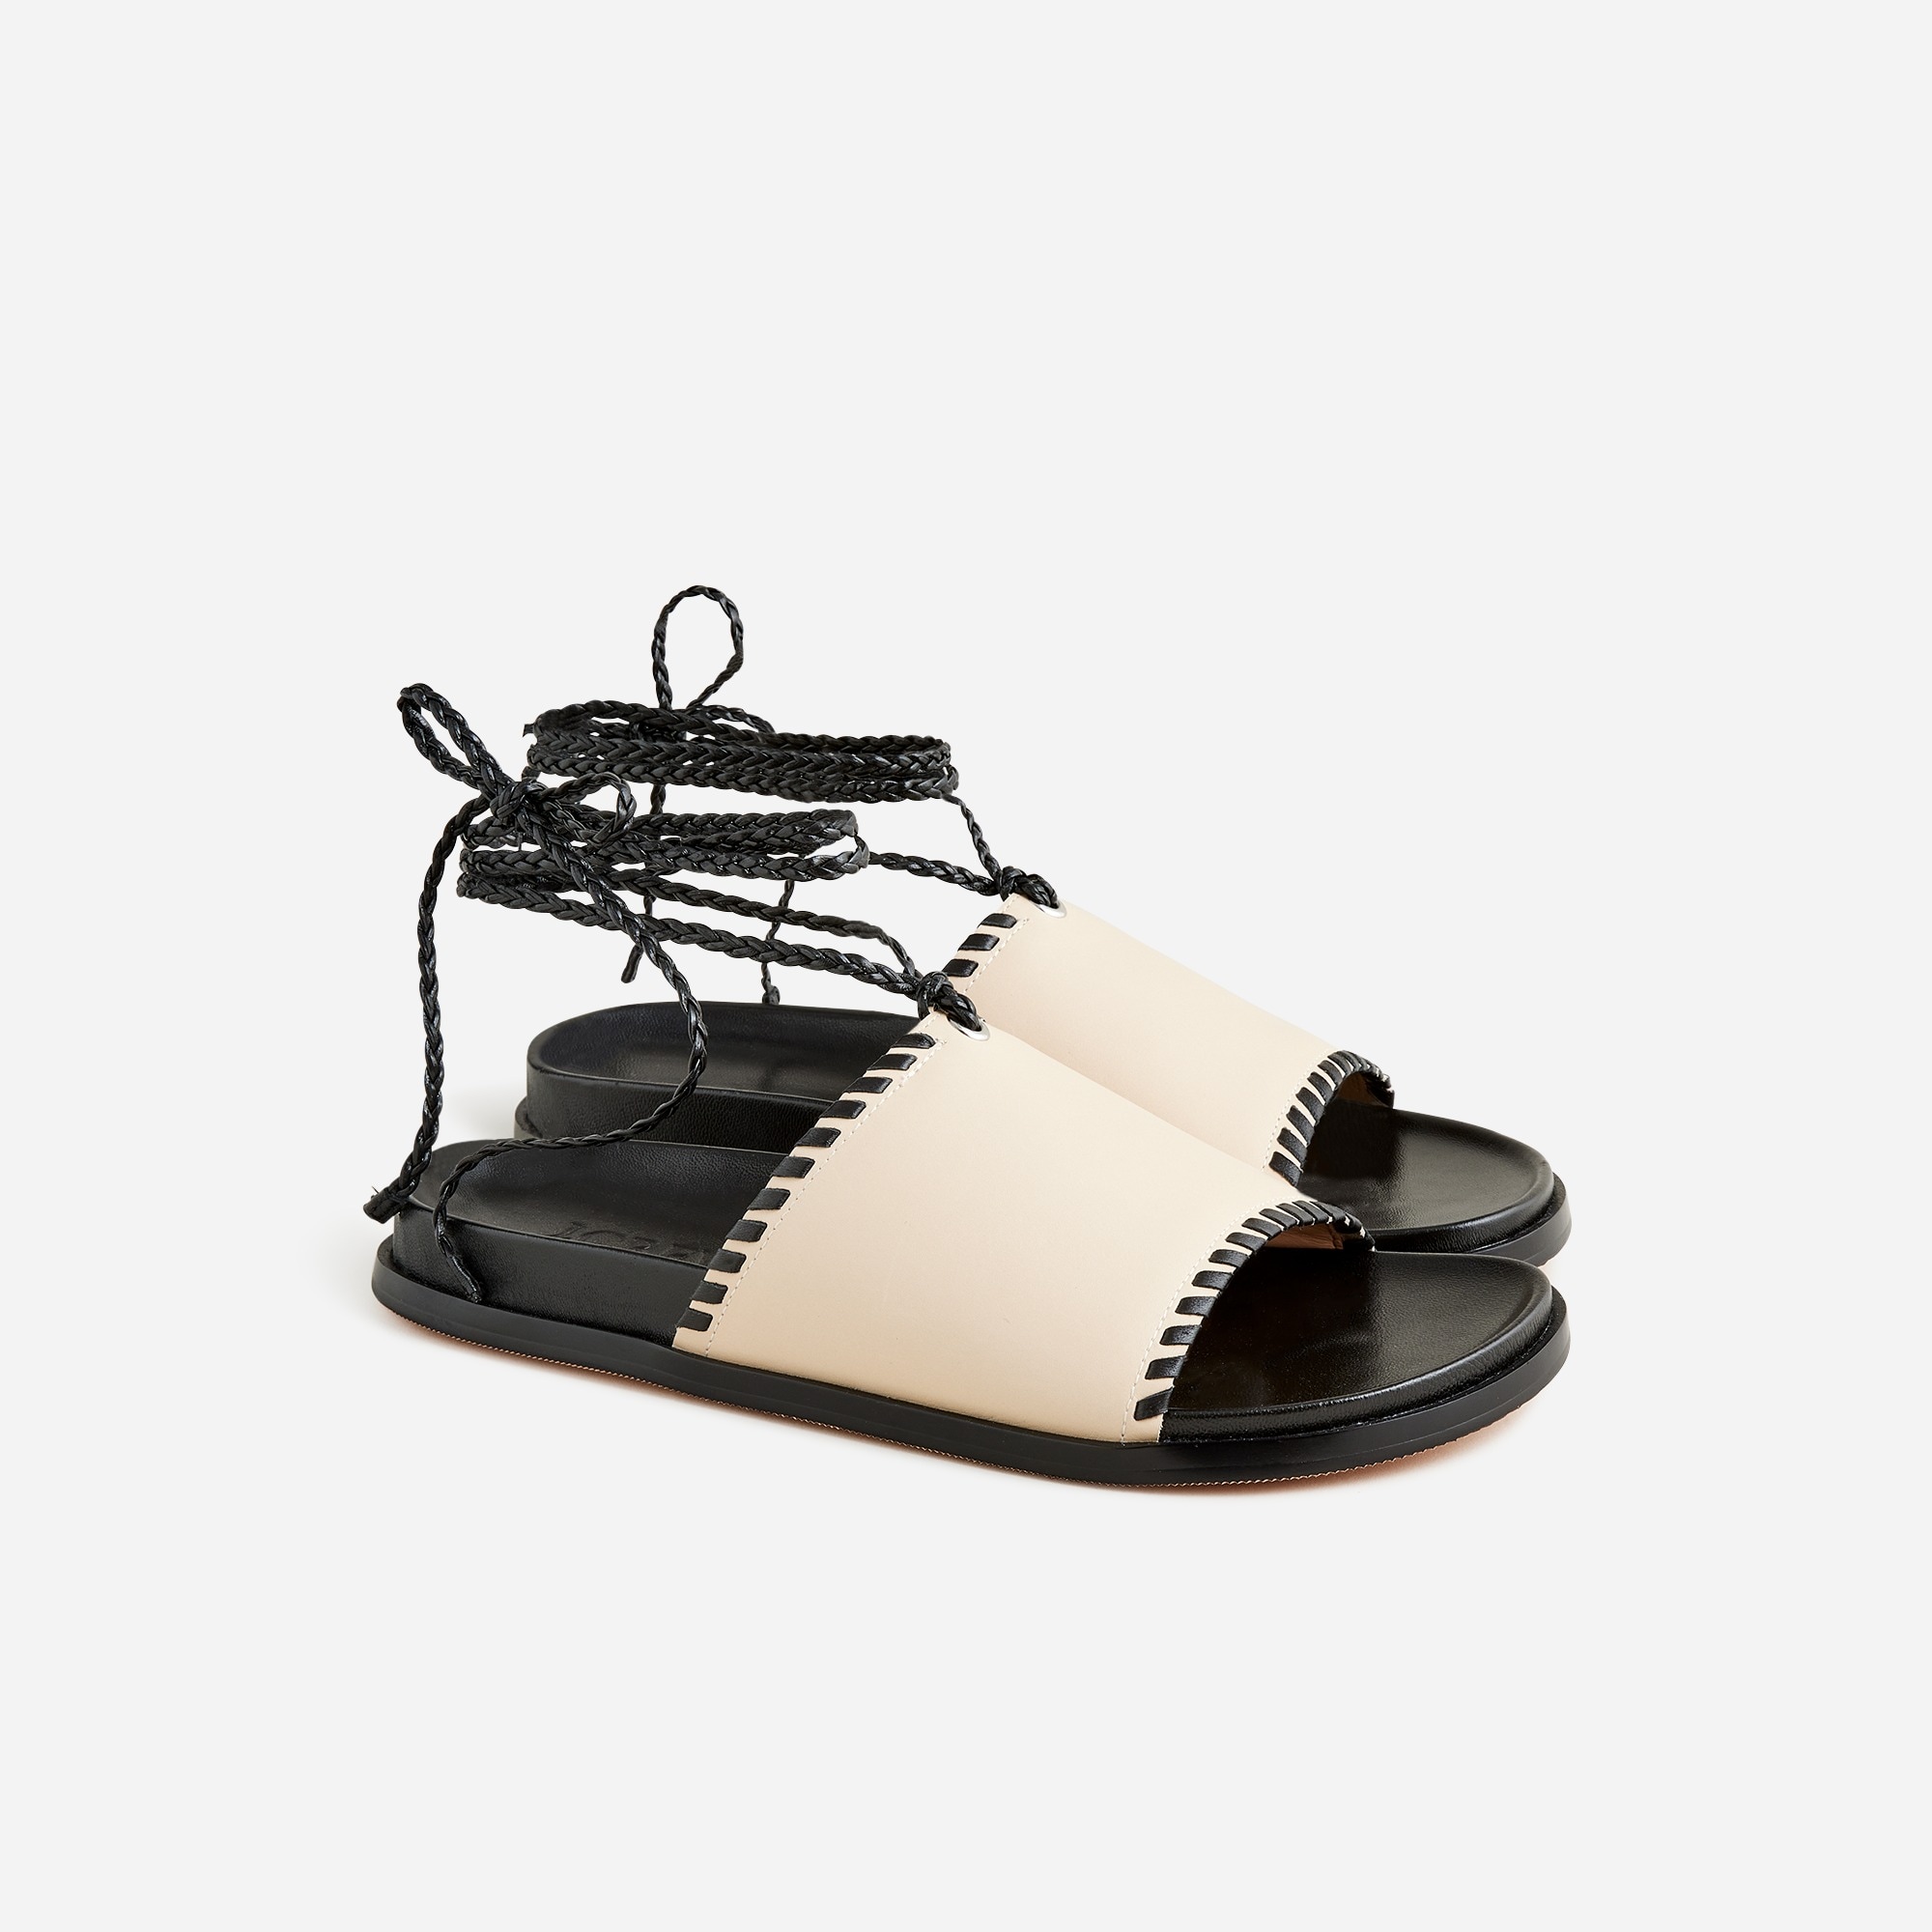  Colbie braided lace-up sandals in leather